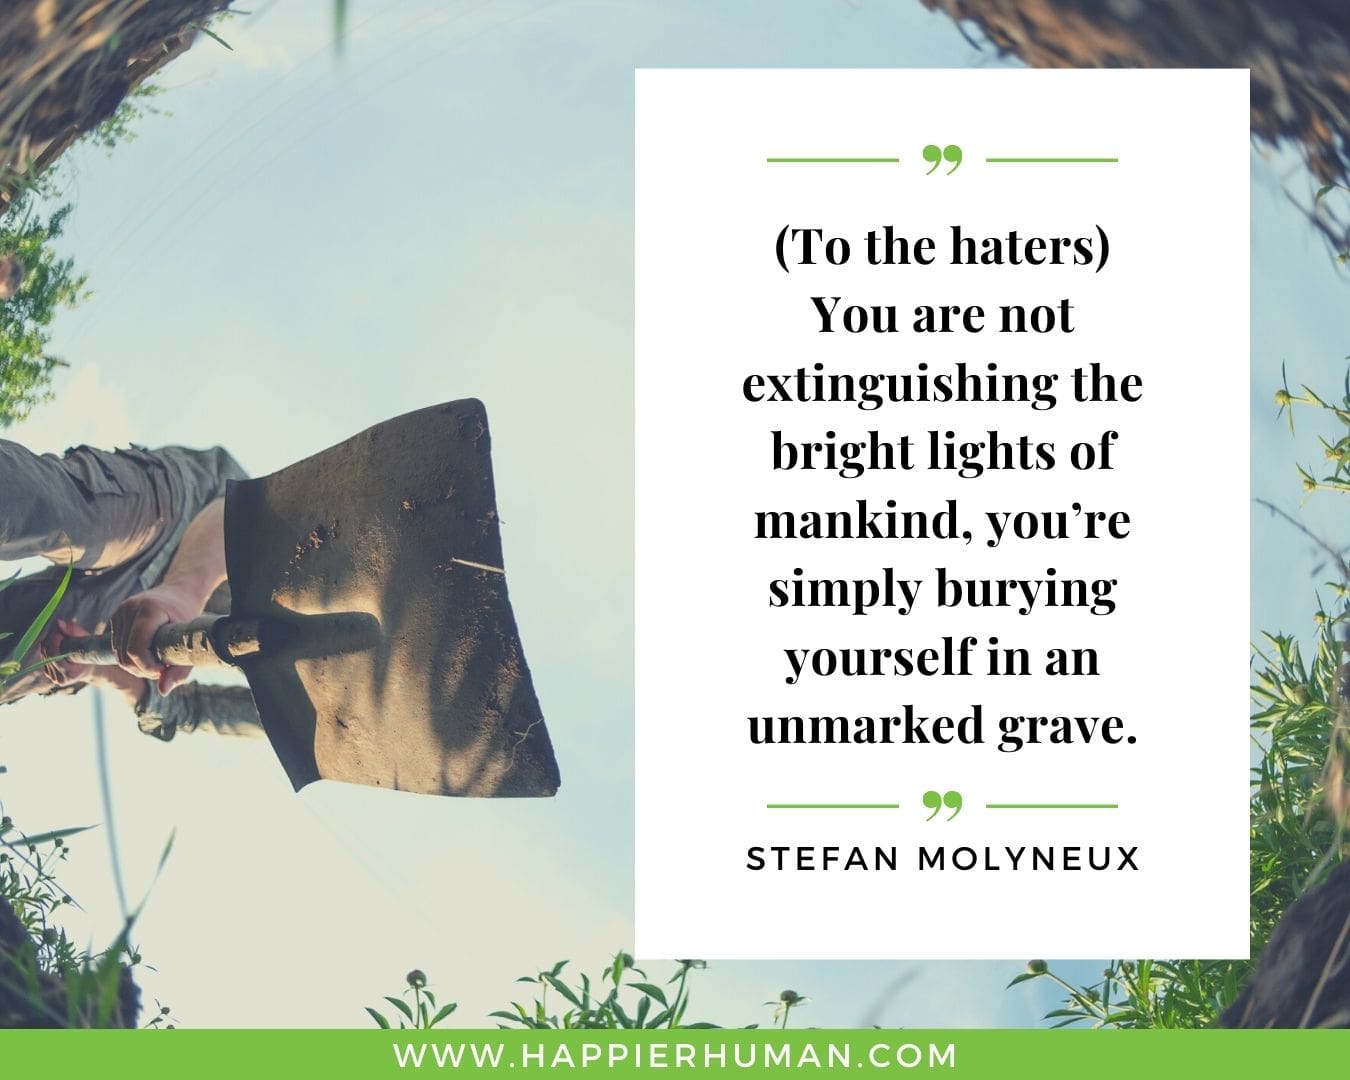 Haters Quotes - “(To the haters) You are not extinguishing the bright lights of mankind, you’re simply burying yourself in an unmarked grave.”- Stefan Molyneux